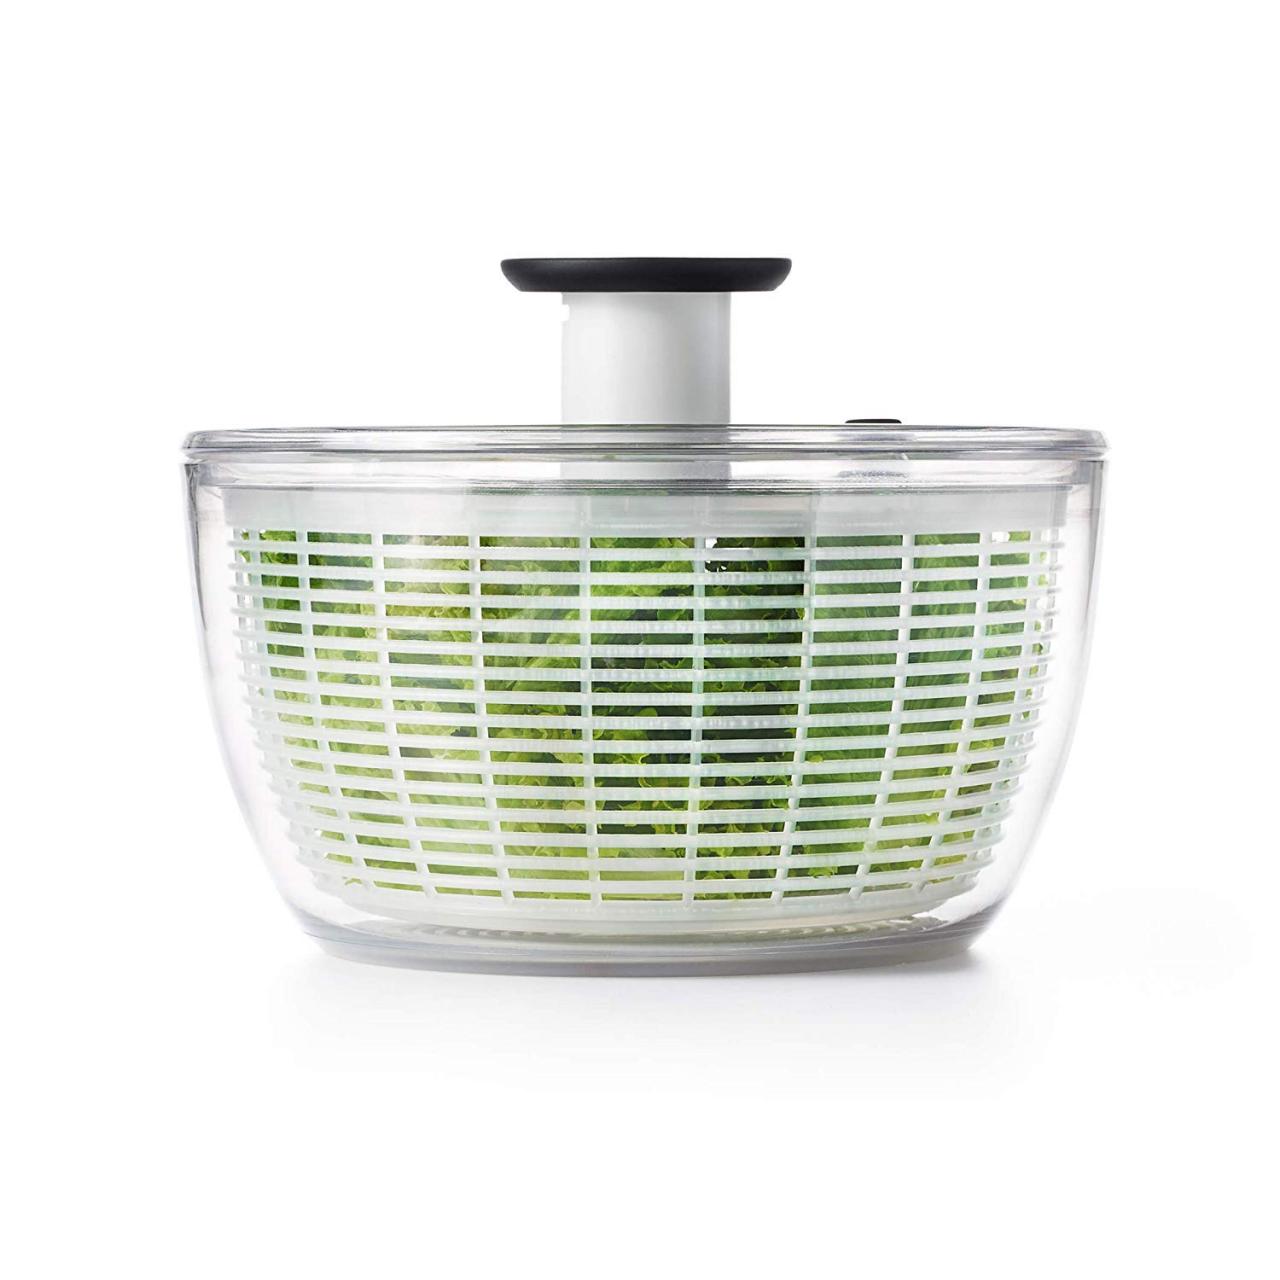 3 Best Salad Spinners 2023 Reviewed, Shopping : Food Network